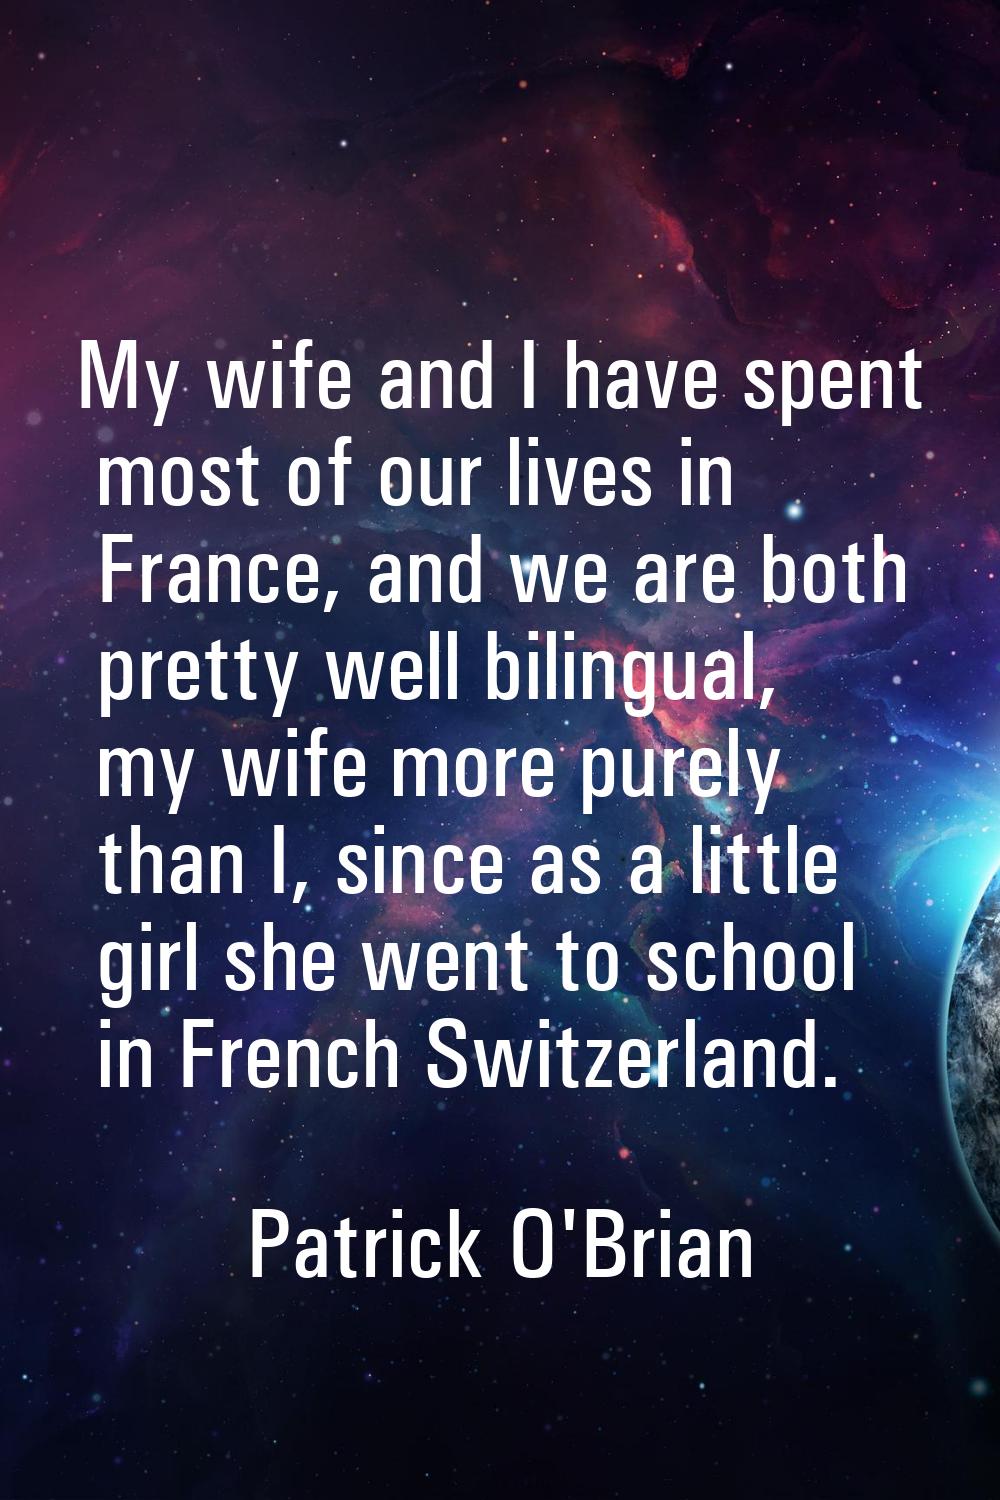 My wife and I have spent most of our lives in France, and we are both pretty well bilingual, my wif